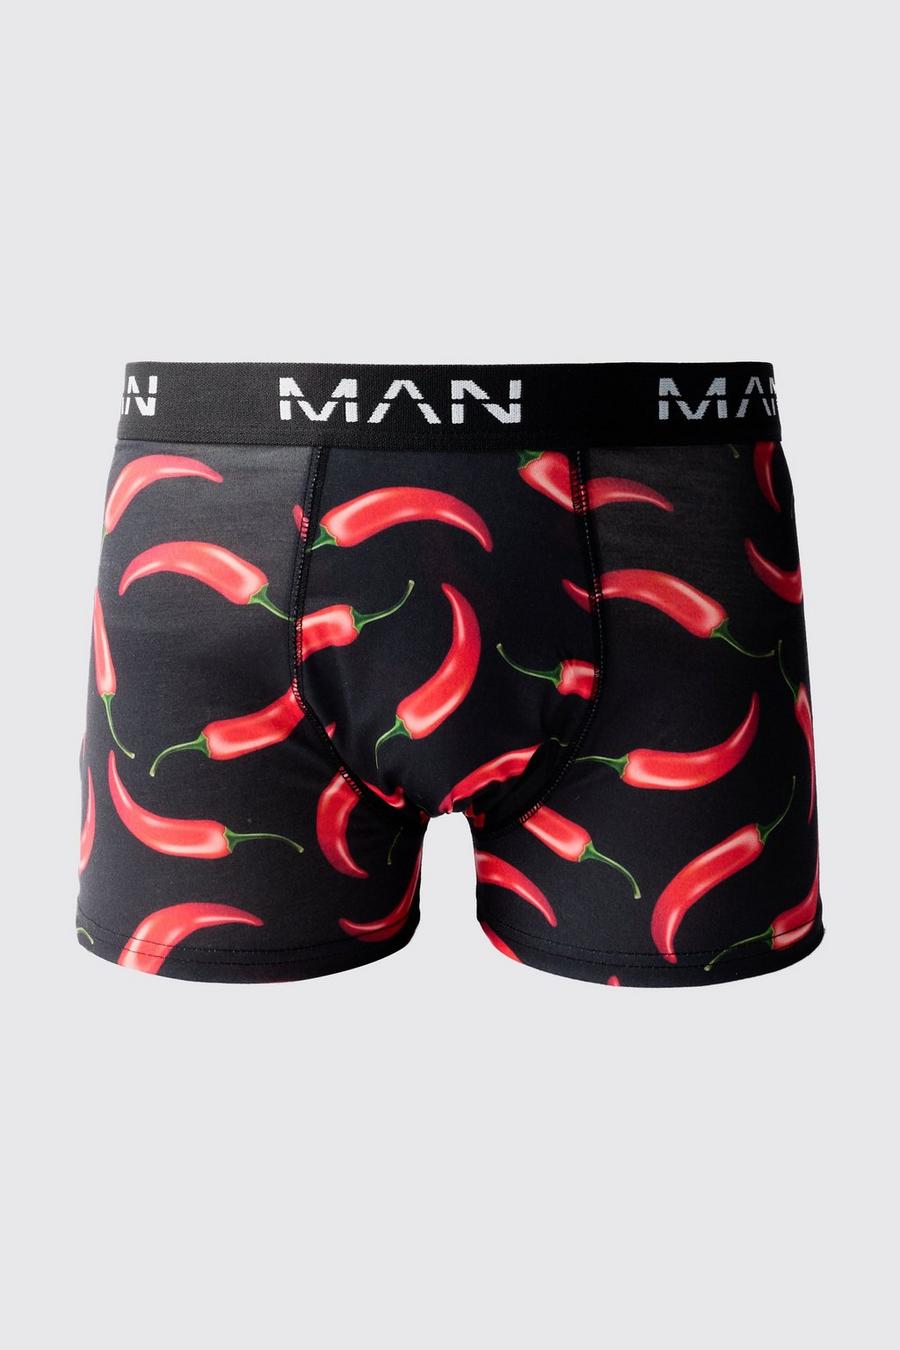 Multi Man Chilli Pepper Printed Boxers image number 1